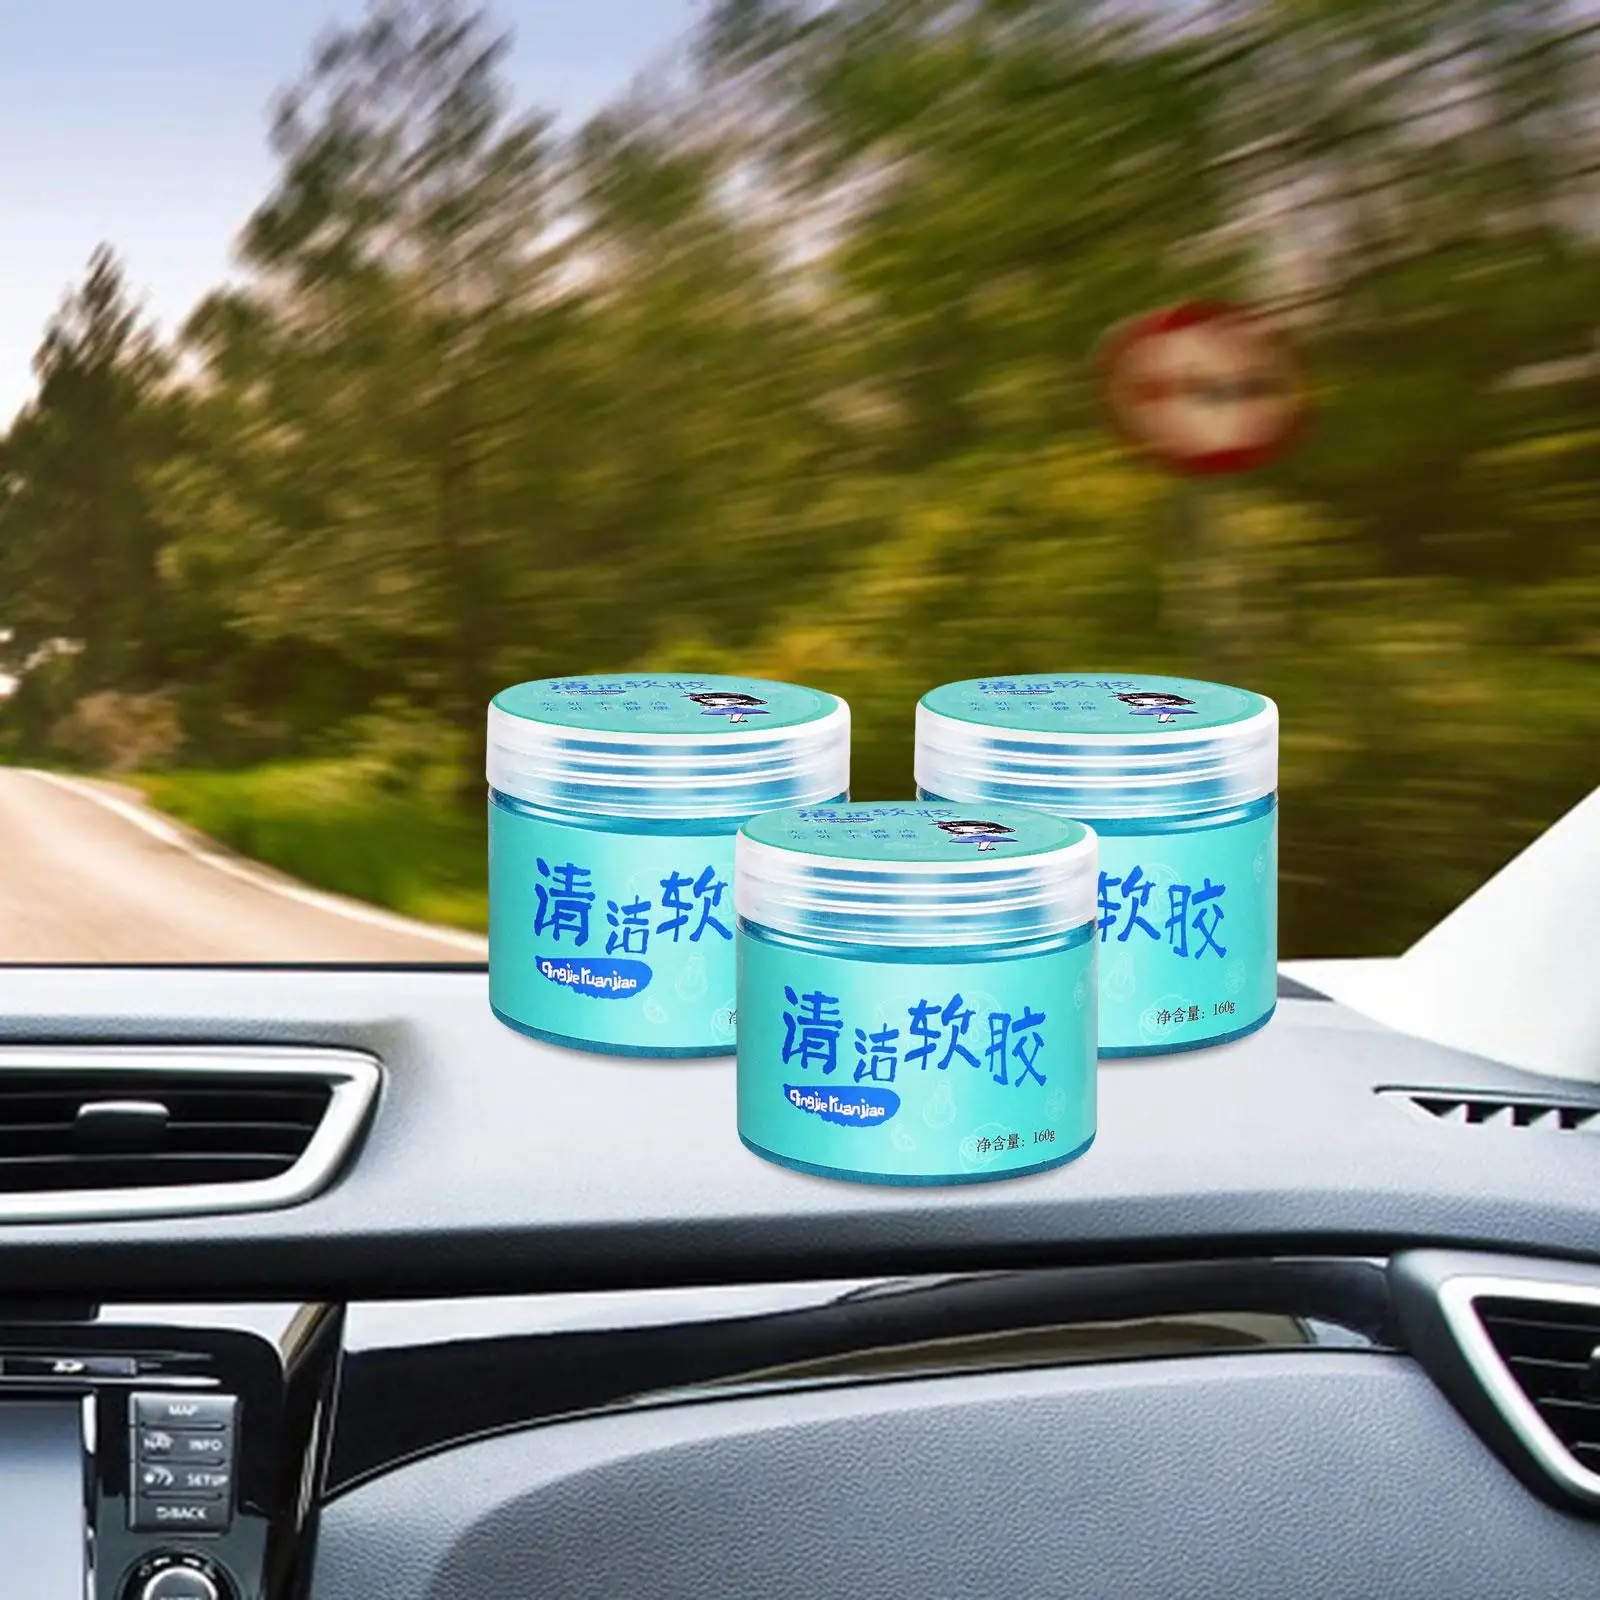 Dust Cleaning Mud Electronics Cleaning Computer Dust Remover Car Dashboard Cleaner for Office Home Camera Laptop PC